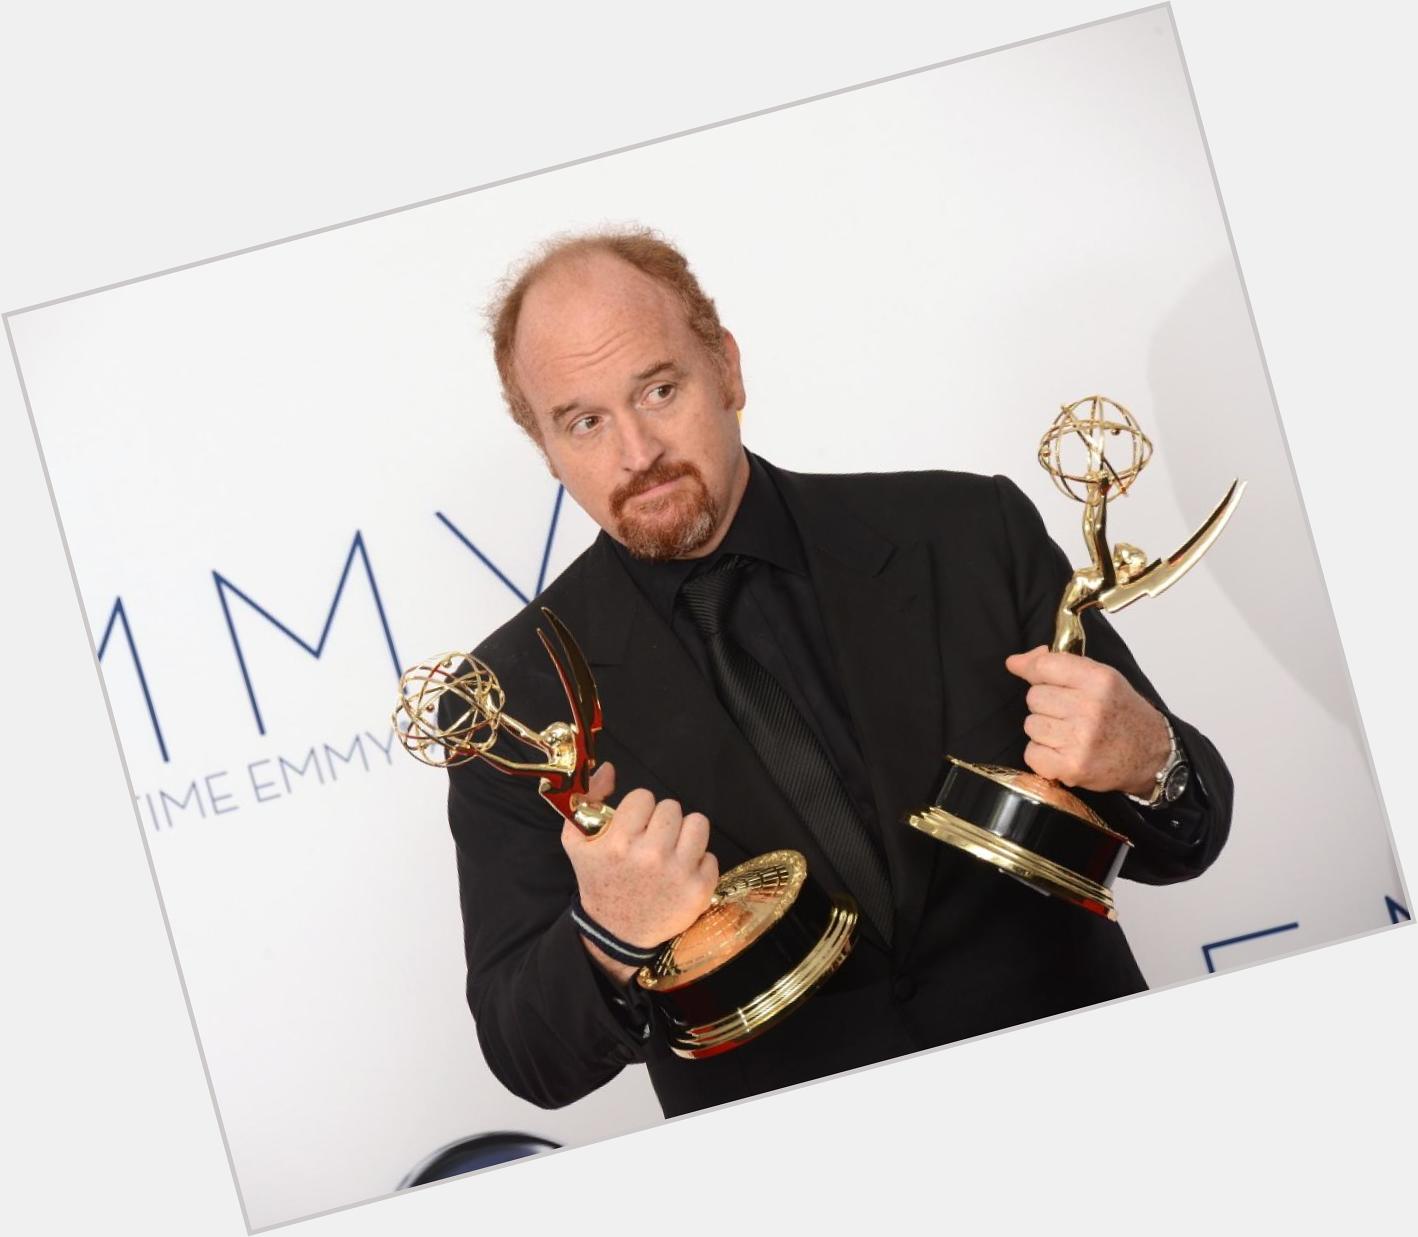 9!2: Happy 47th Birthday 2 actor/dir/prod/writer Louis C.K.! Fave 4 Louie+stand-up!  